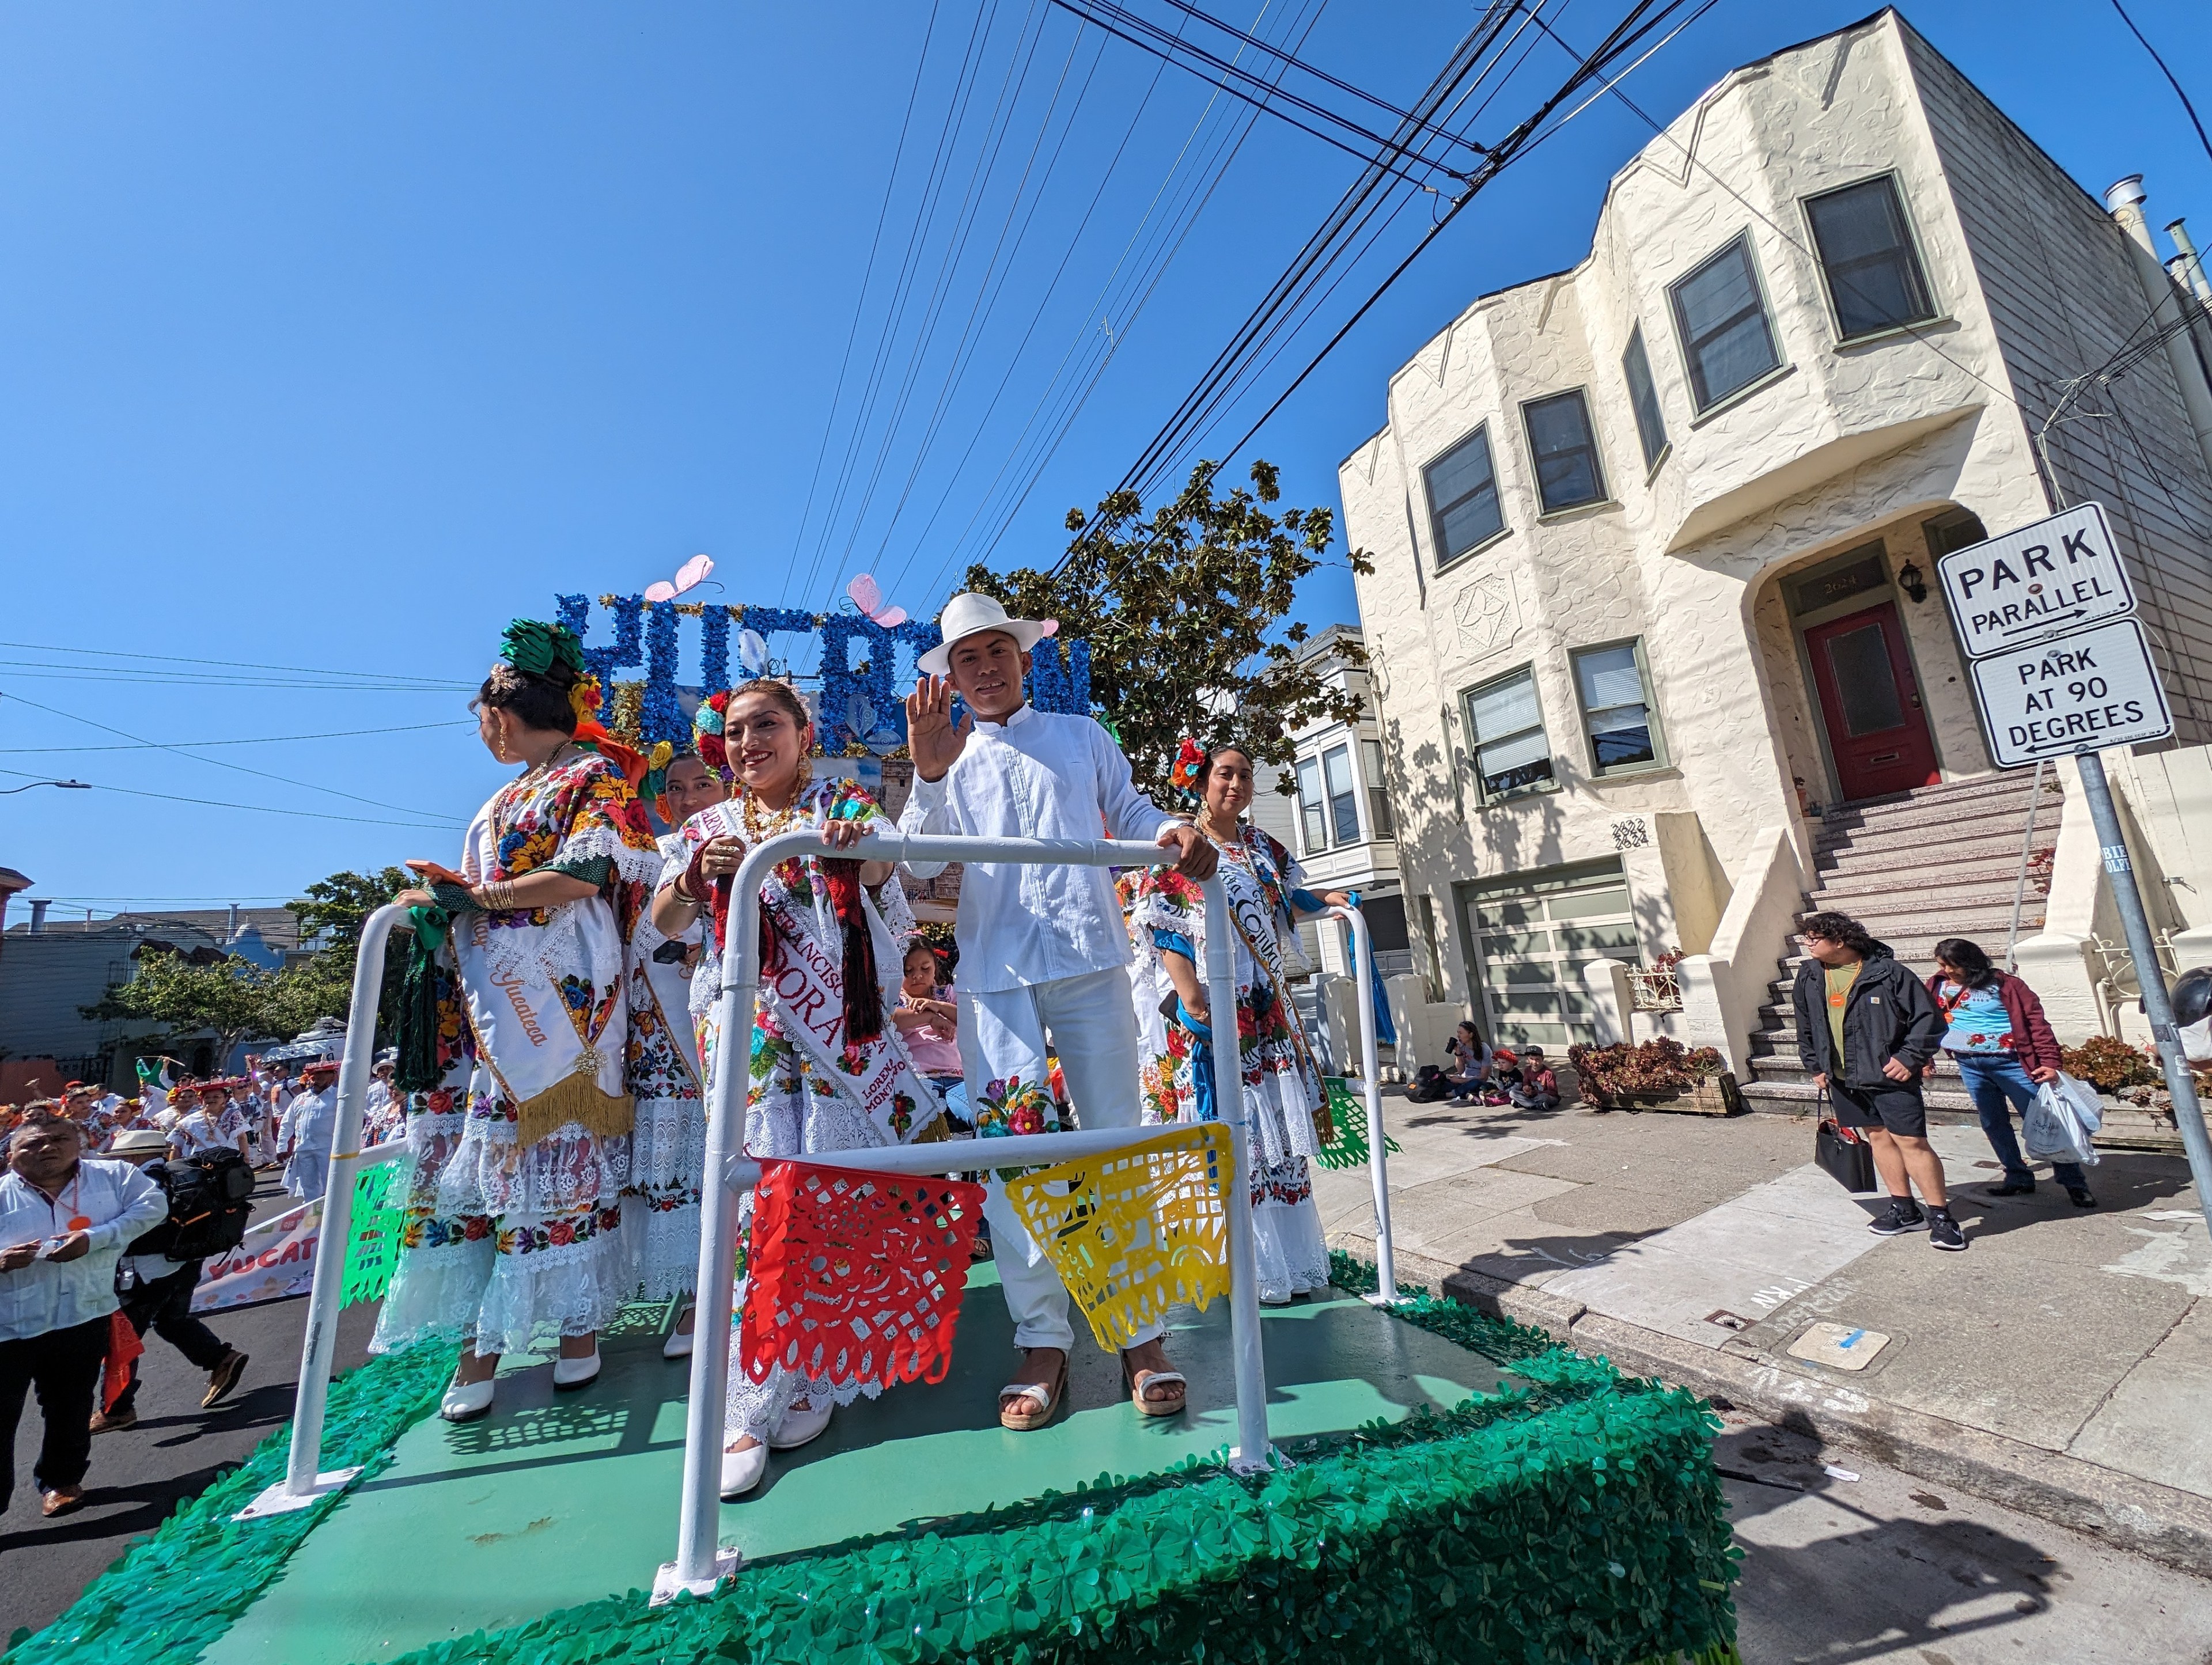 A green float with white railings waits along a city street curb as several people wearing ornate and colorful outfits smile and wave at a camera.